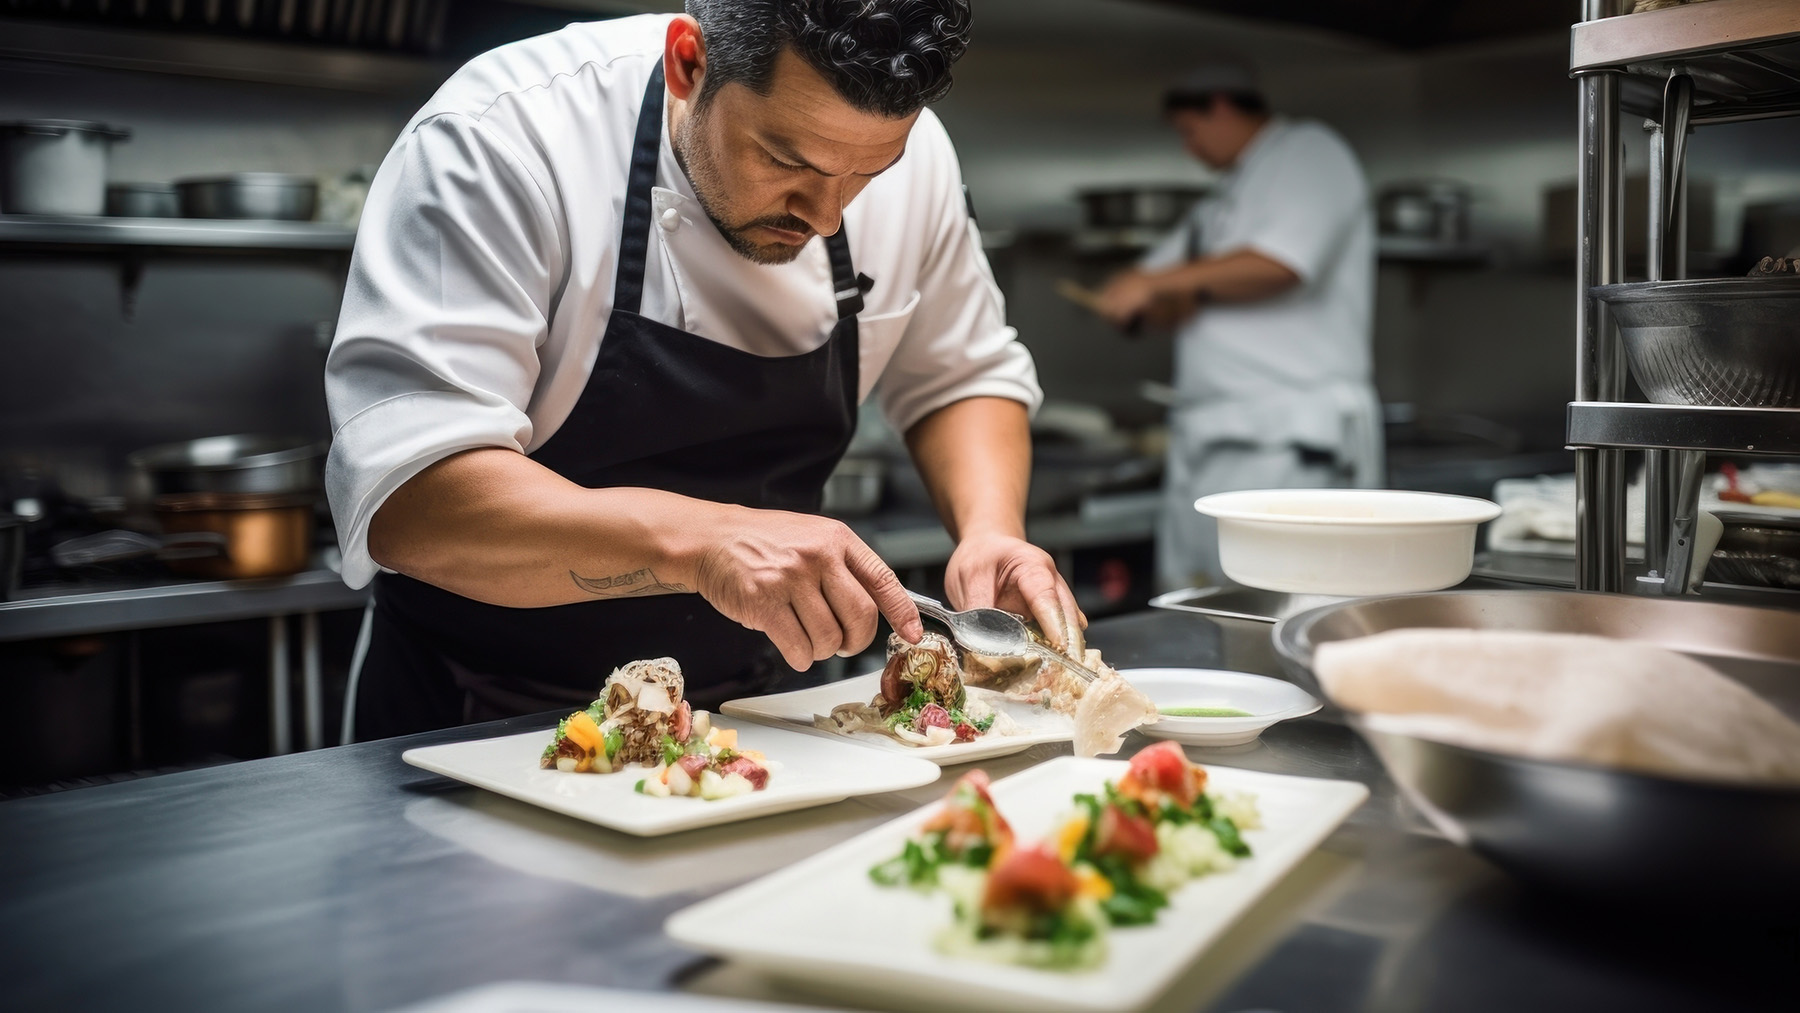 Stock photo of a male chef in a professional kitchen preparing a dish (Image courtesy of RawPixel.com)